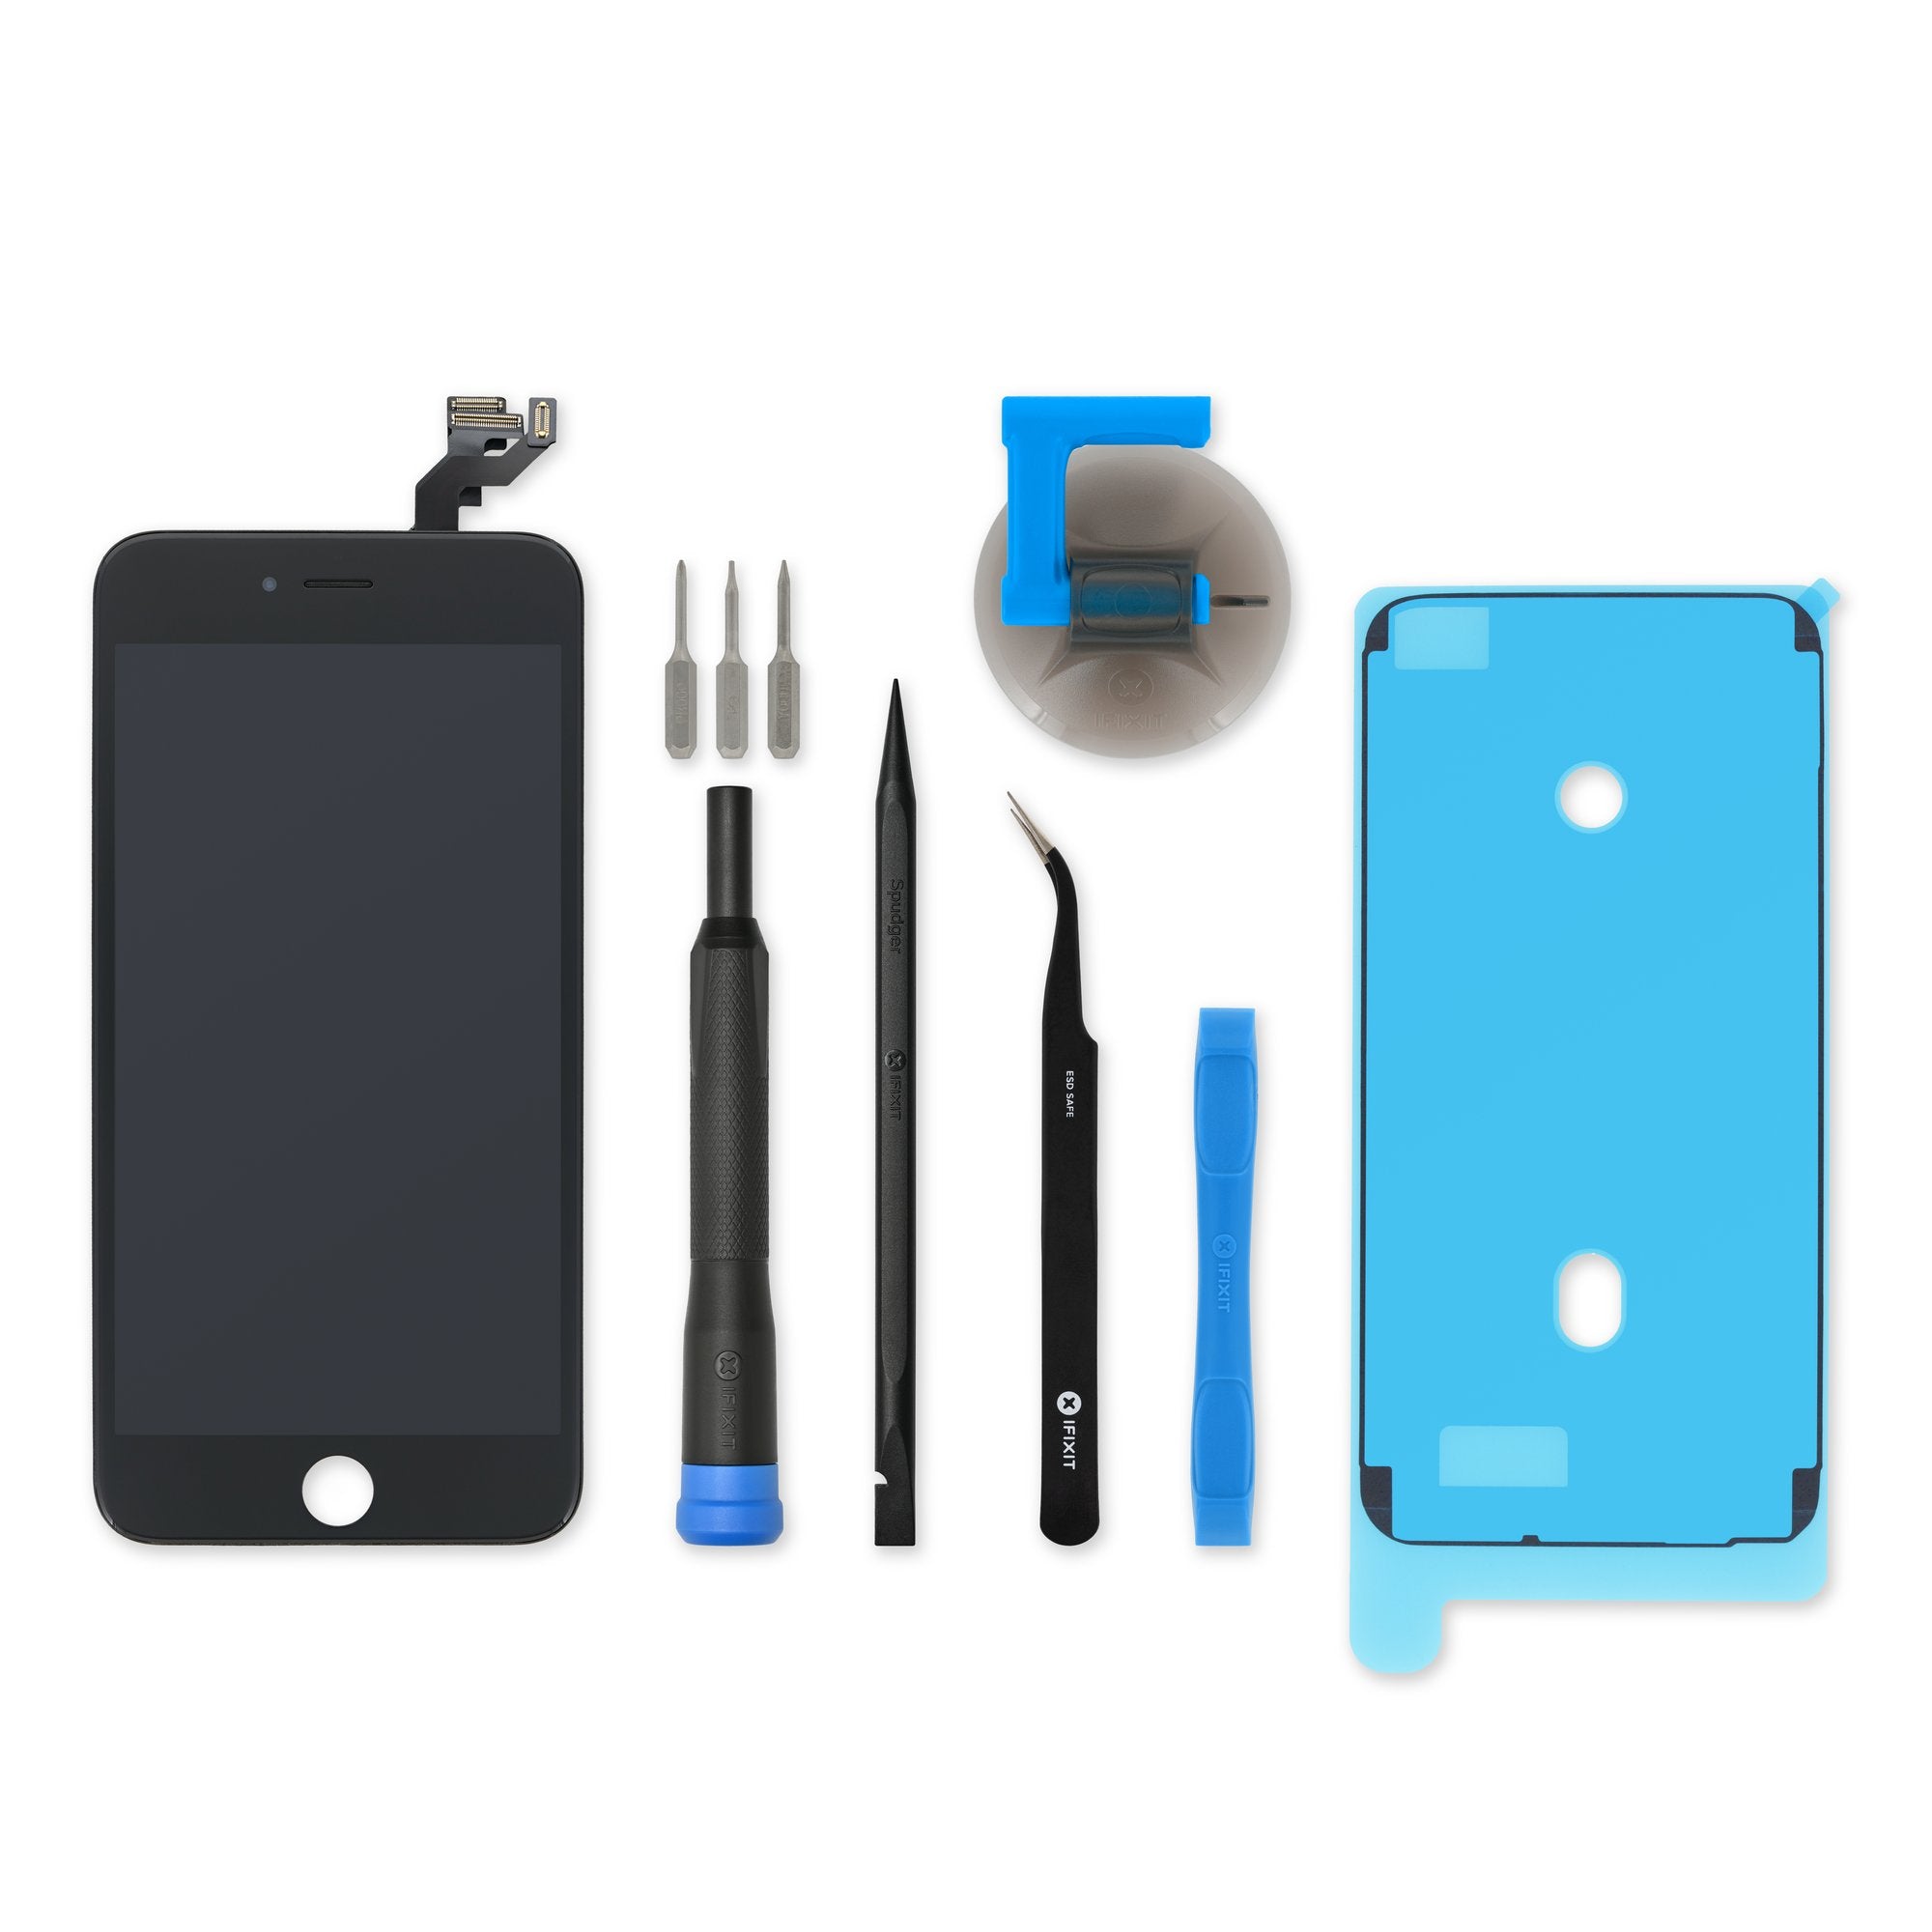 iPhone 6s Plus Screen: LCD + Digitizer Replacement Part, Kit